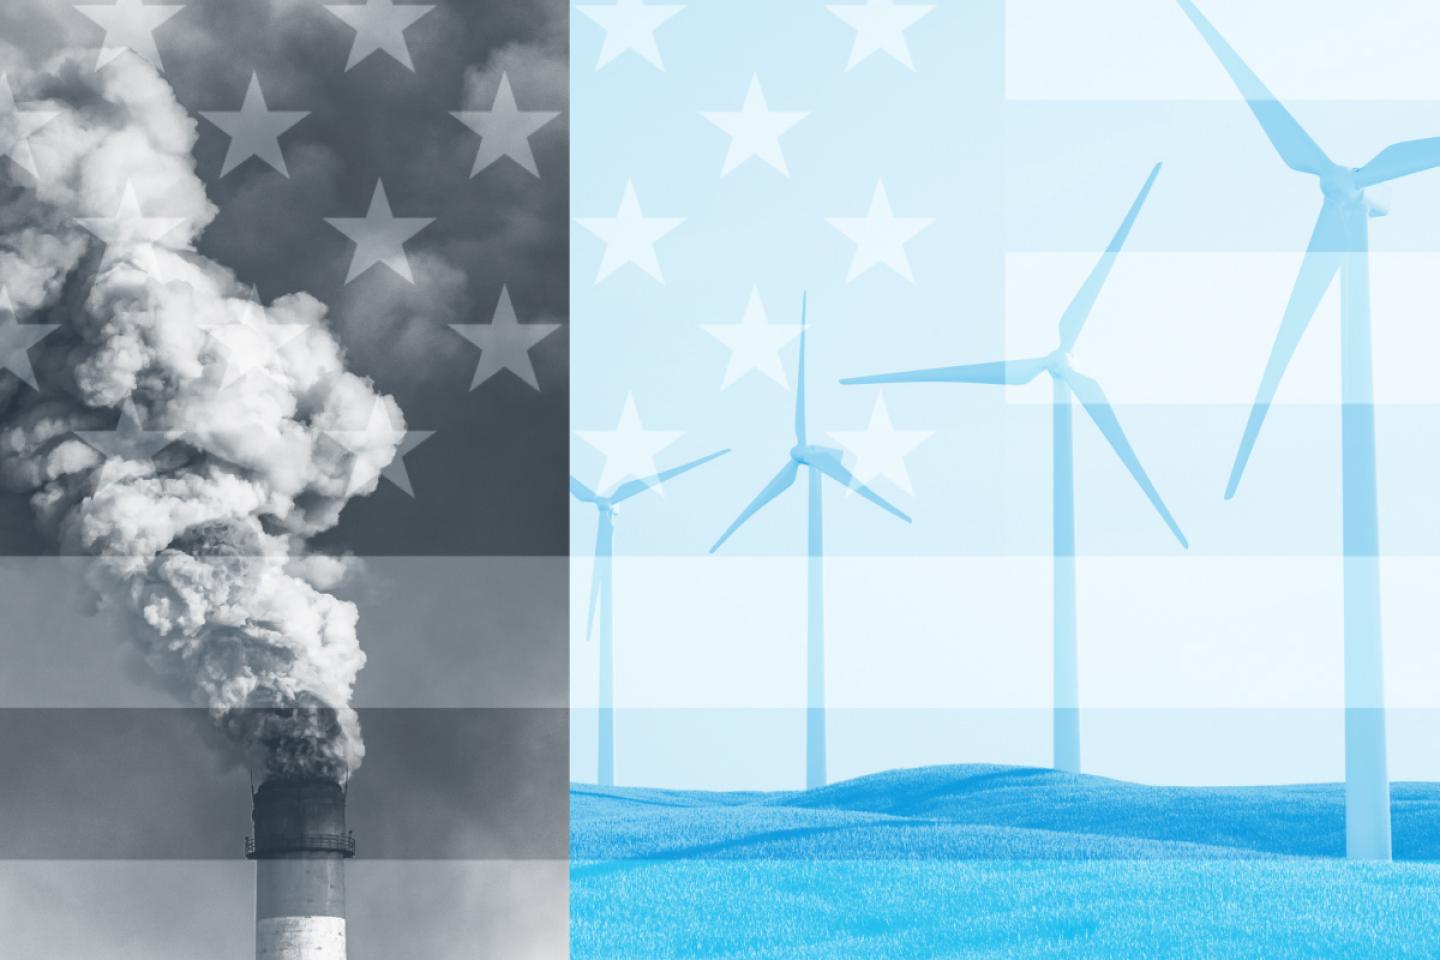 An image of a smokestack and wind turbines overlaid with the American flag